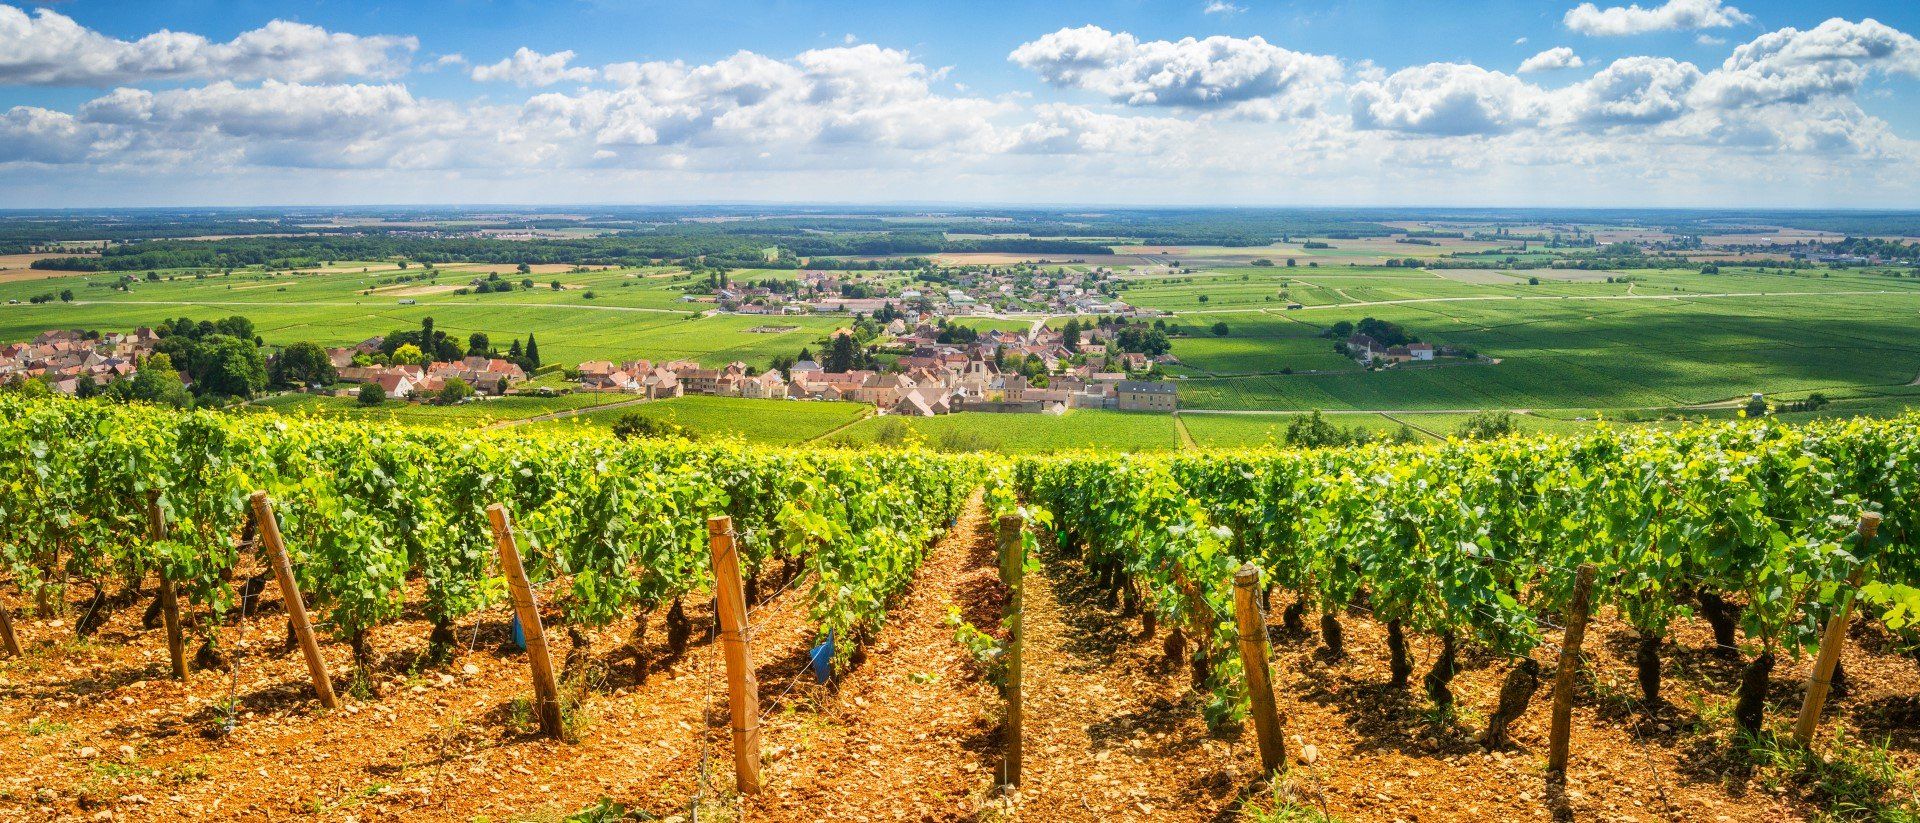 Famed for its production of world-class wines, discover the plump vineyards of Bordeaux